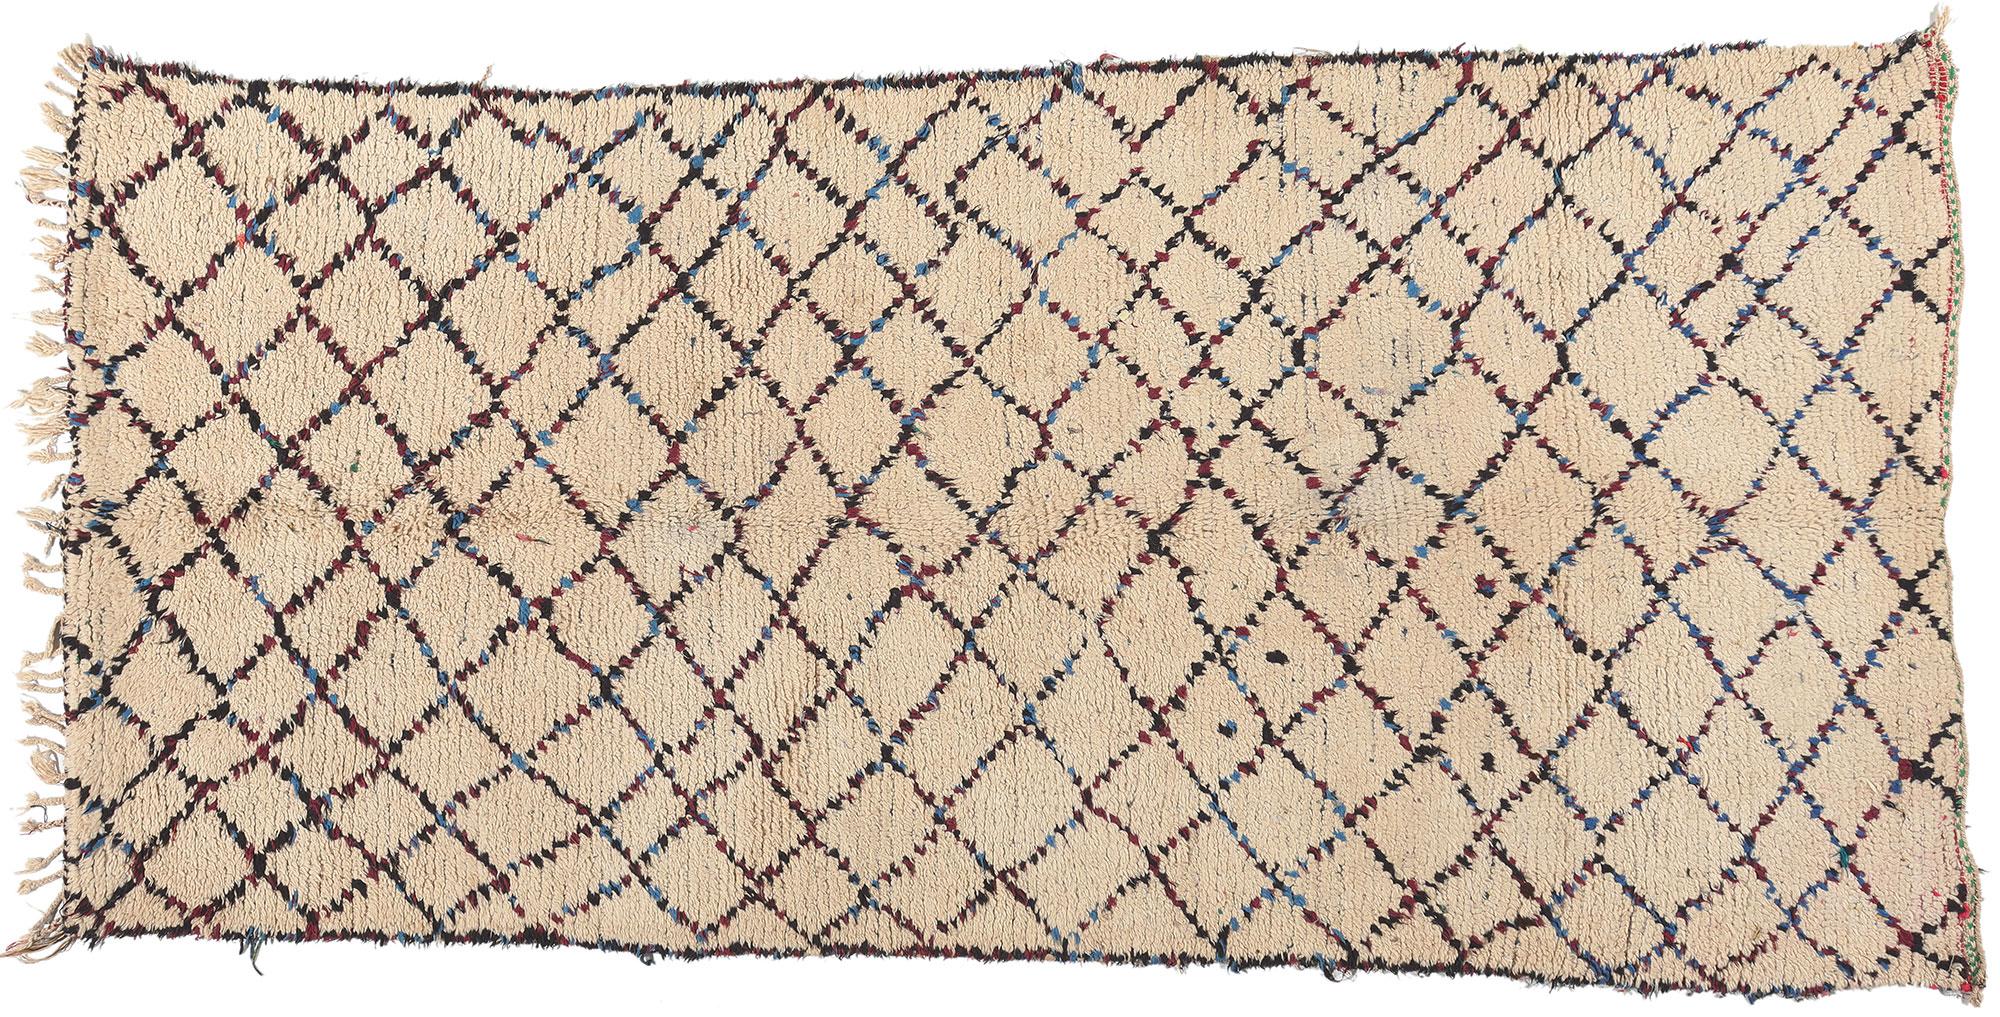 Vintage Boucherouite Moroccan Azilal Rag Rug, Sustainability Meets Cozy Nomad For Sale 3